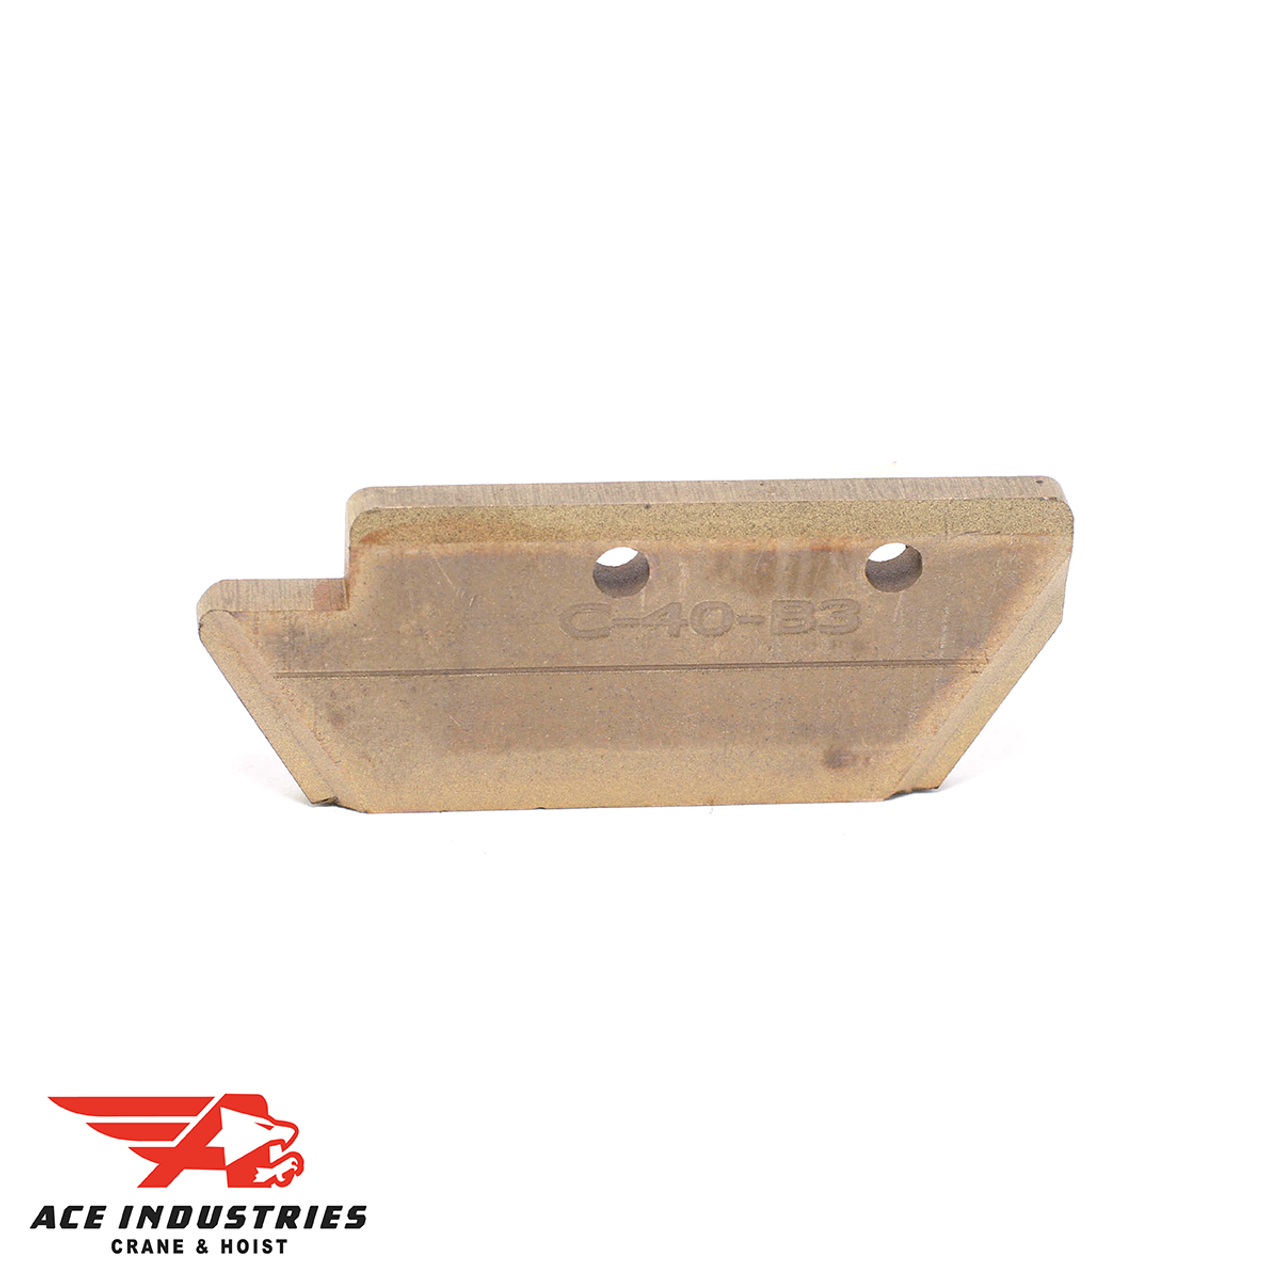 Duct-O-Wire Contact Shoe, Collector Shoe Insert - C-40-B3